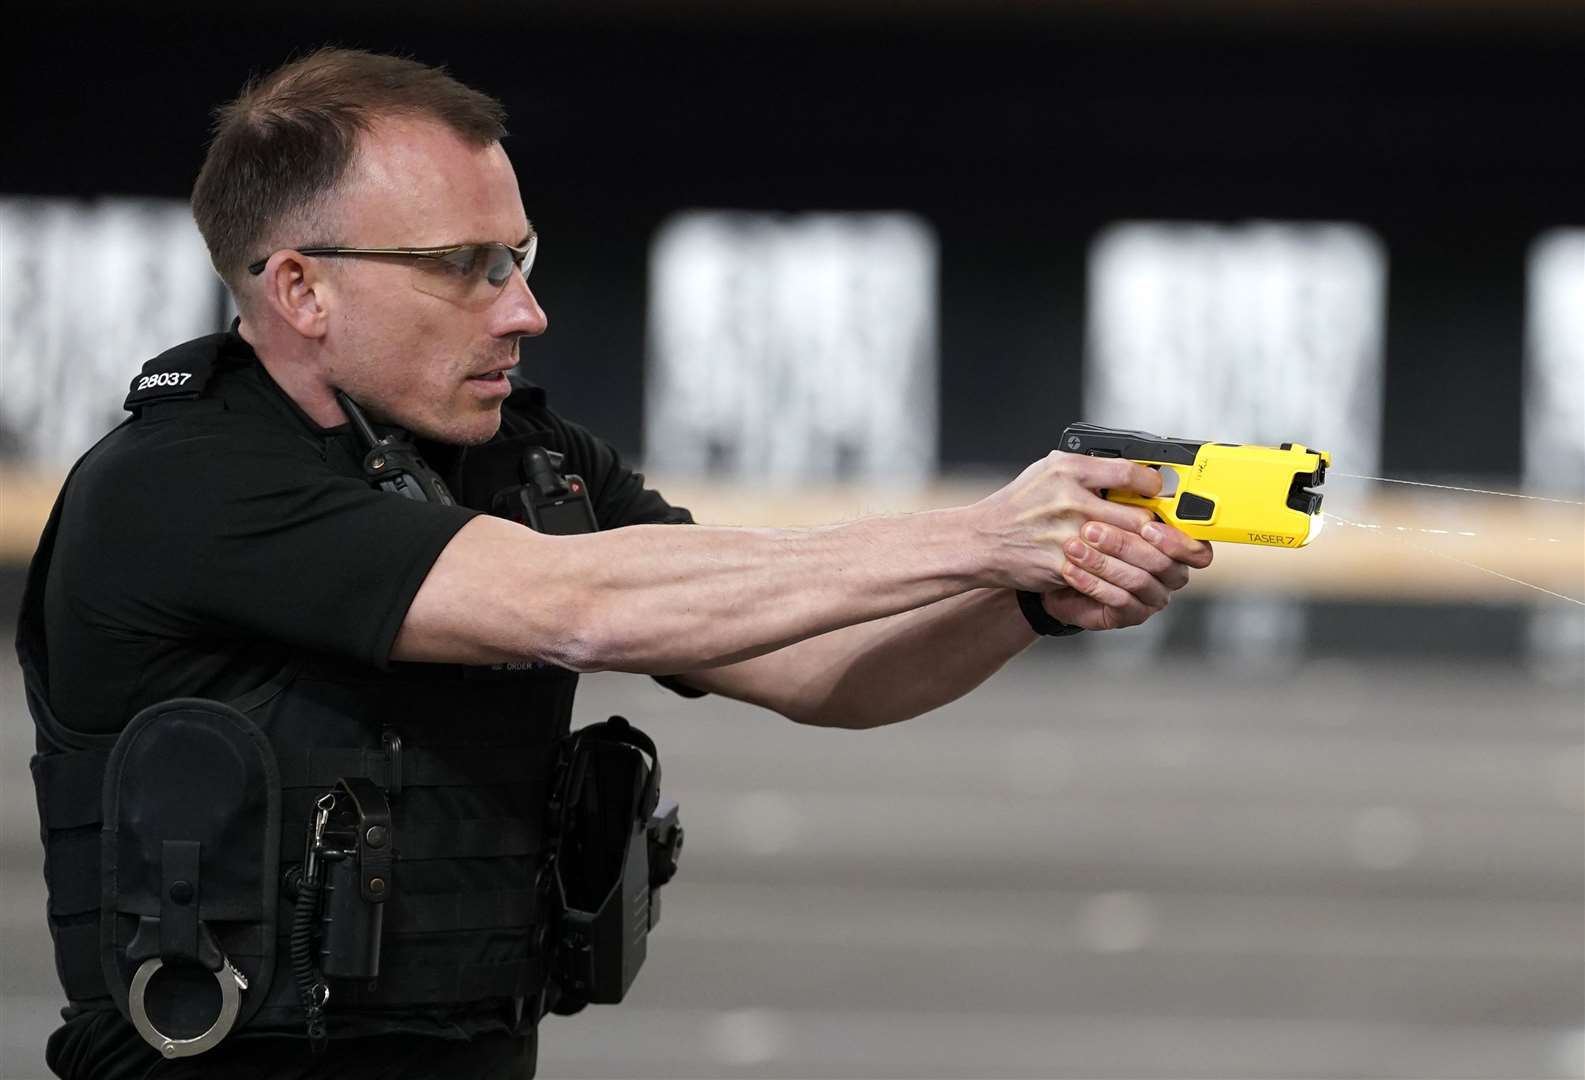 An officer demonstrates the Taser 7 which has two cartridge types for use depending on the proximity of a person (Andrew Matthews/PA)